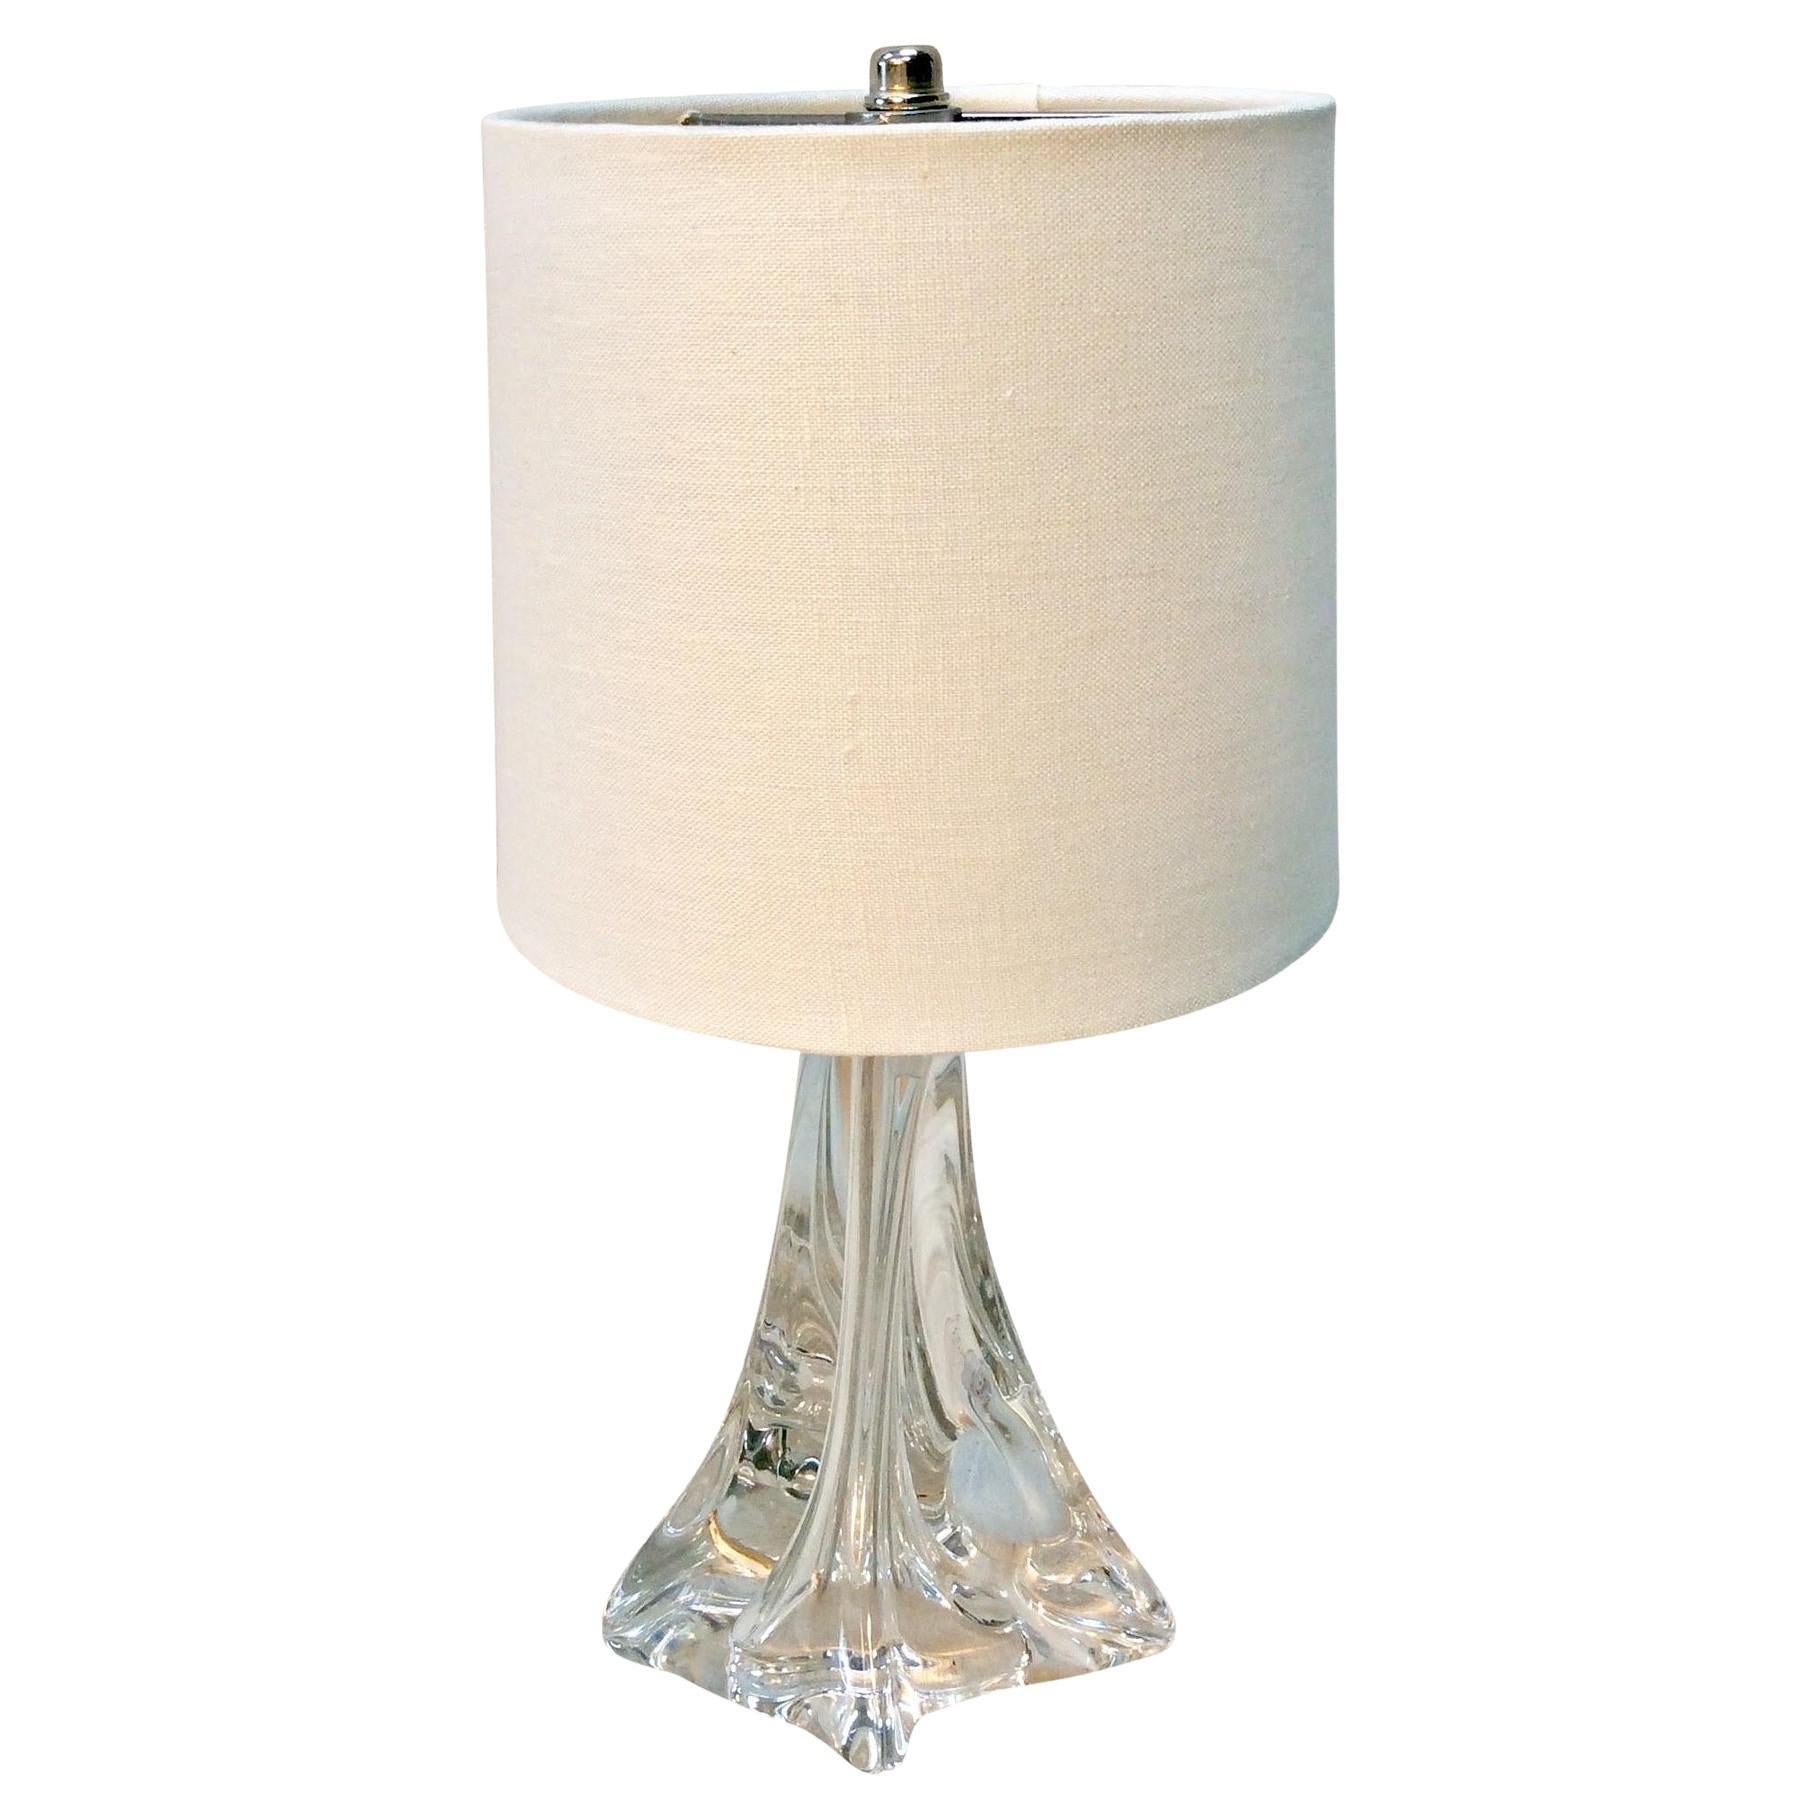 Mid-20th Century French Art Glass Table Lamp For Sale